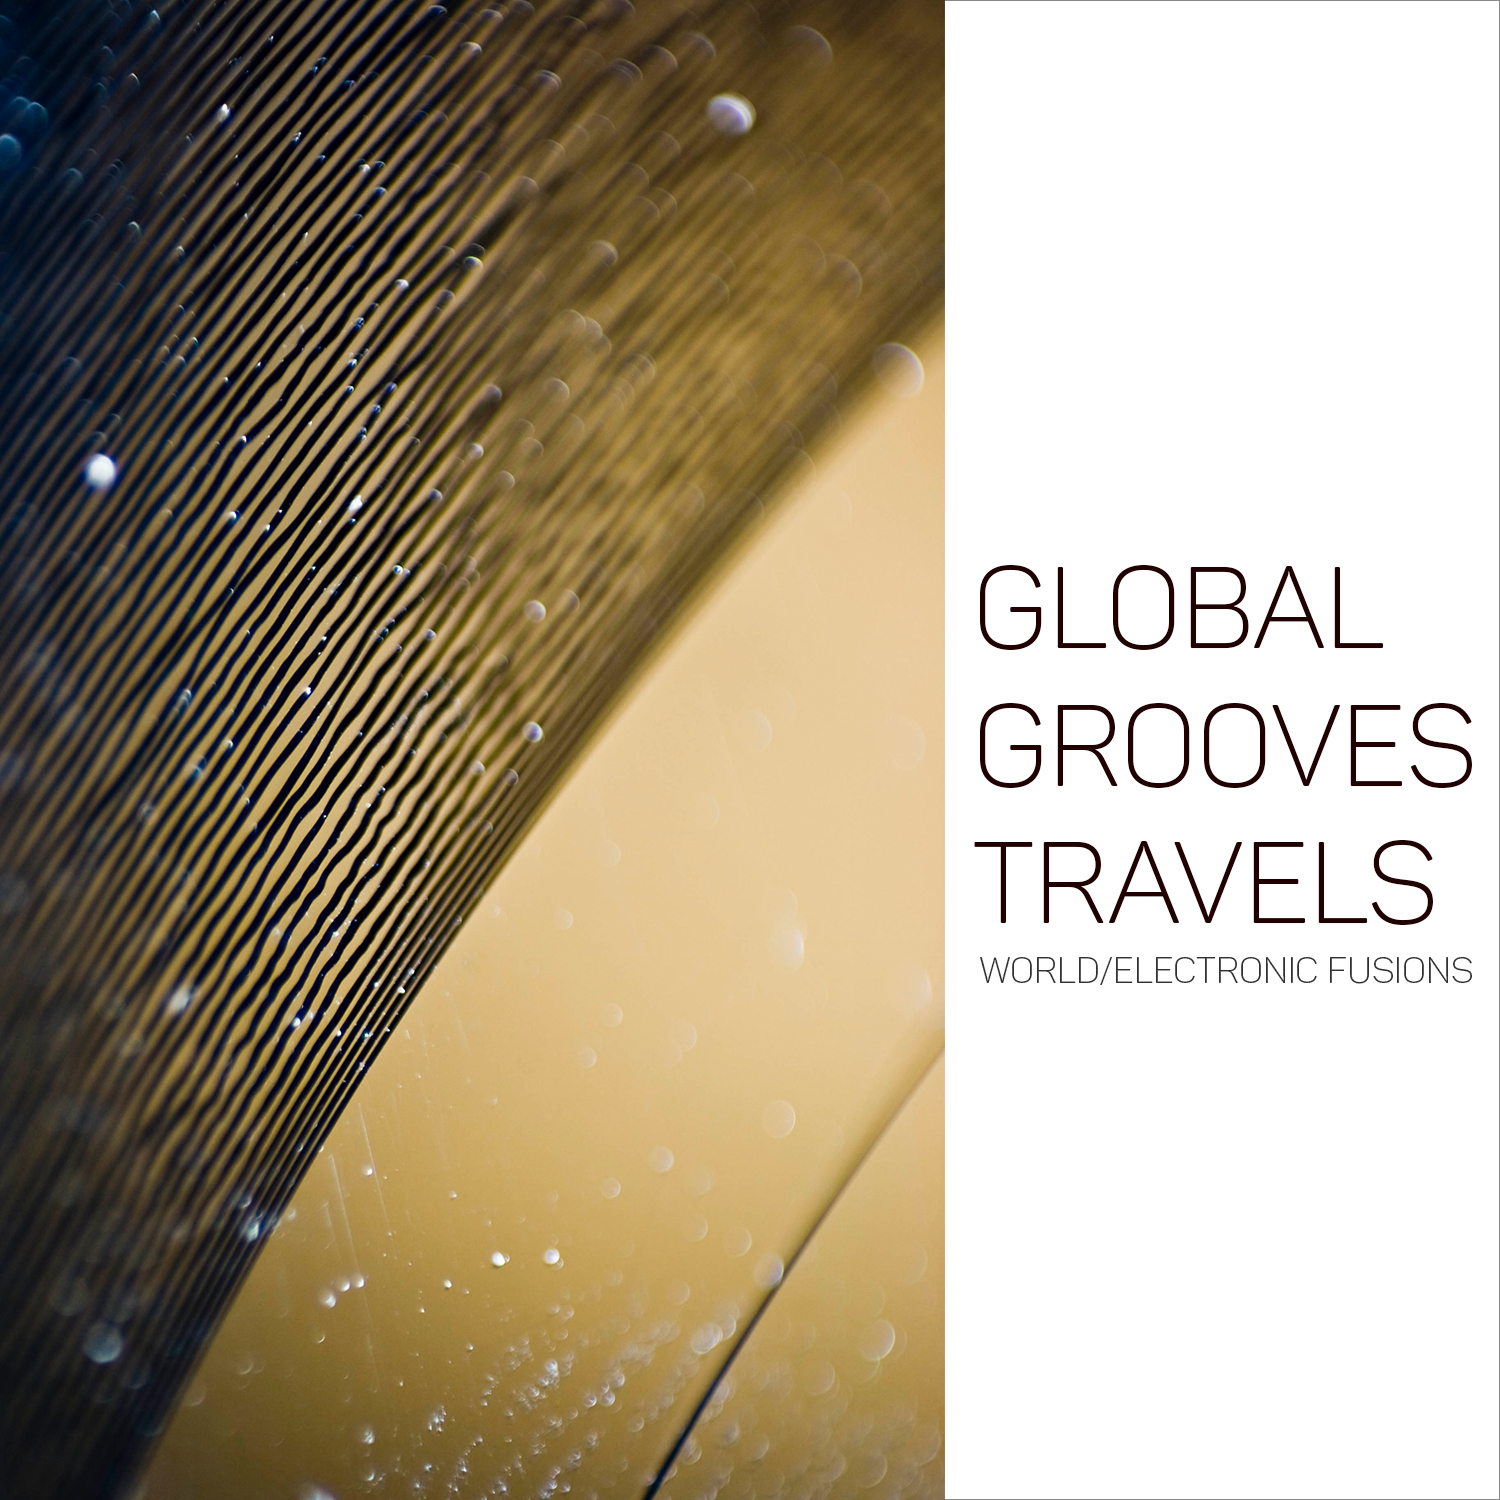 Global Grooves Travels (World/Electronic Fusions)